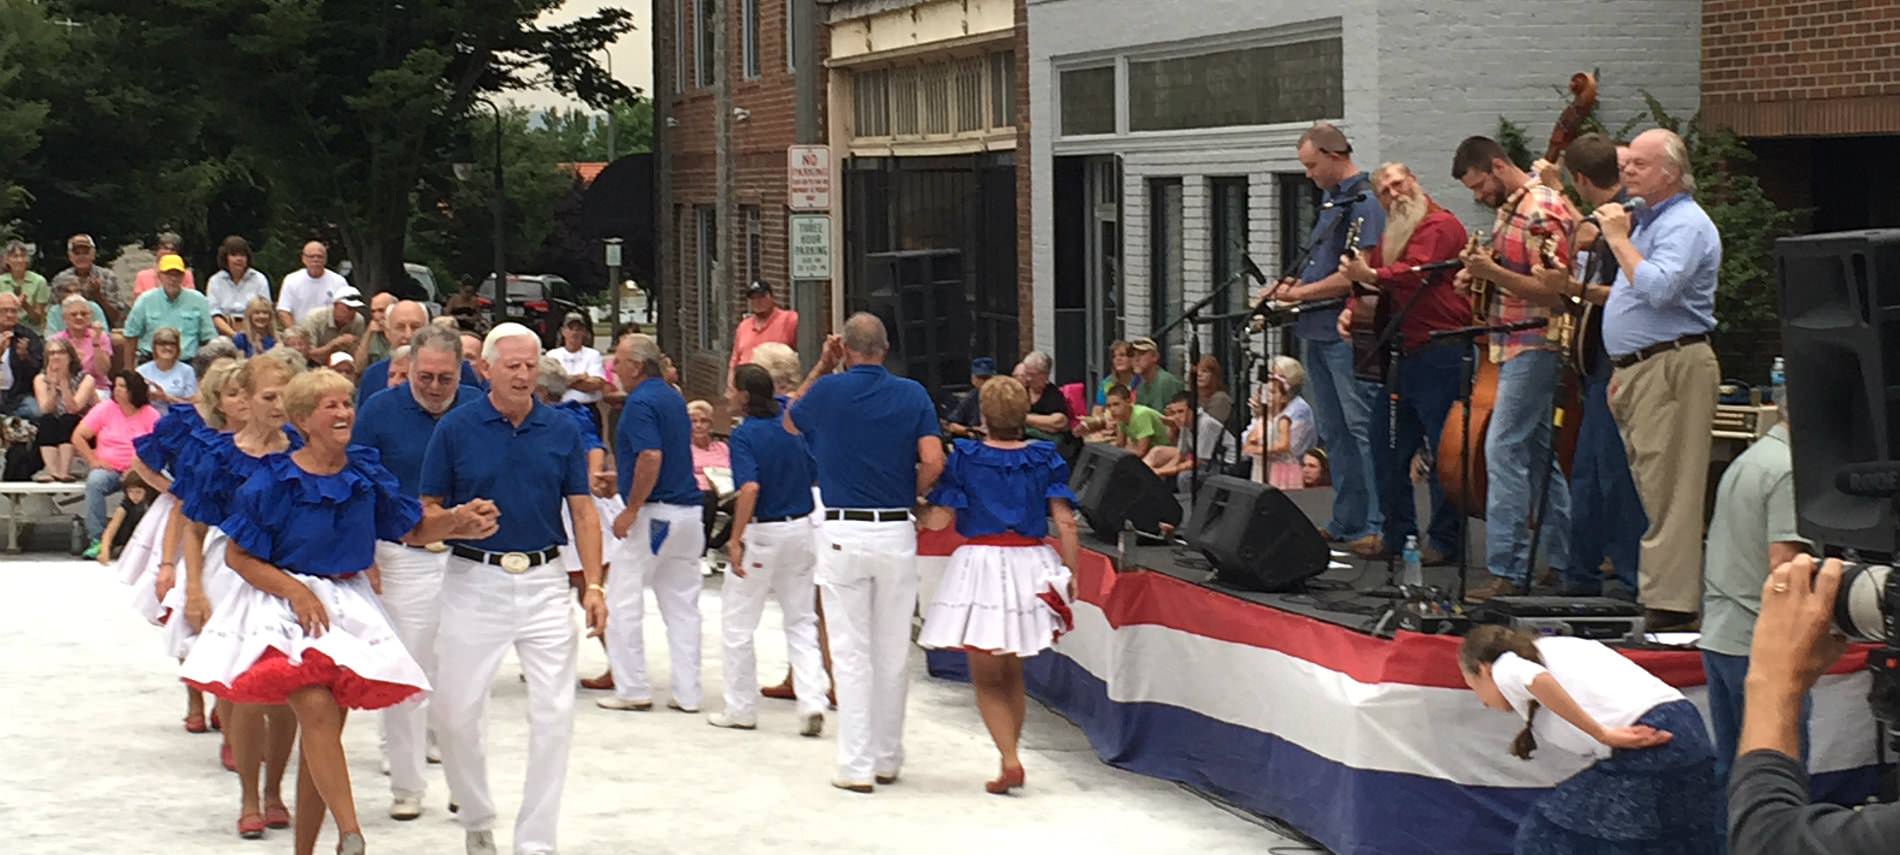 City celebration, band playing on a raised platform, couples in blue shirts and white slacks and skirts dancing